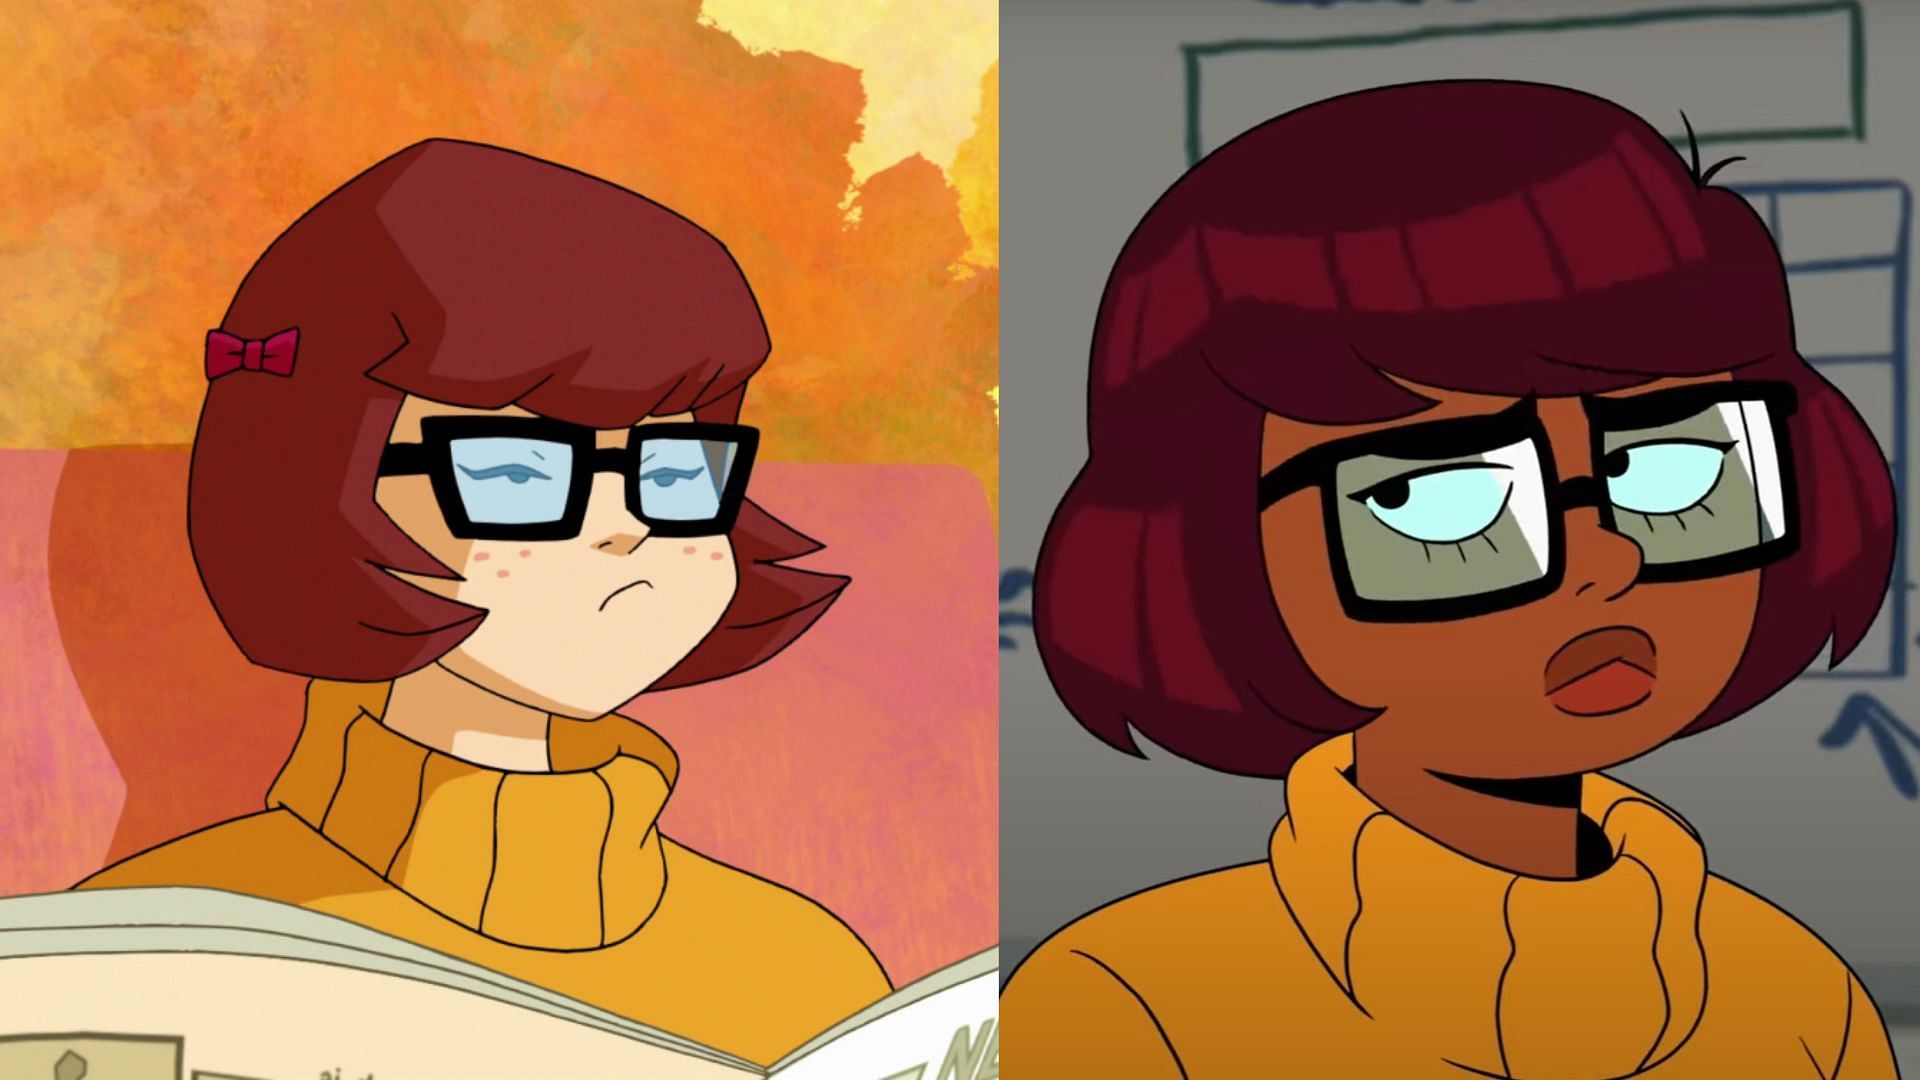 Why the Velma Show wasn't exactly what I Expect it to be 🙄